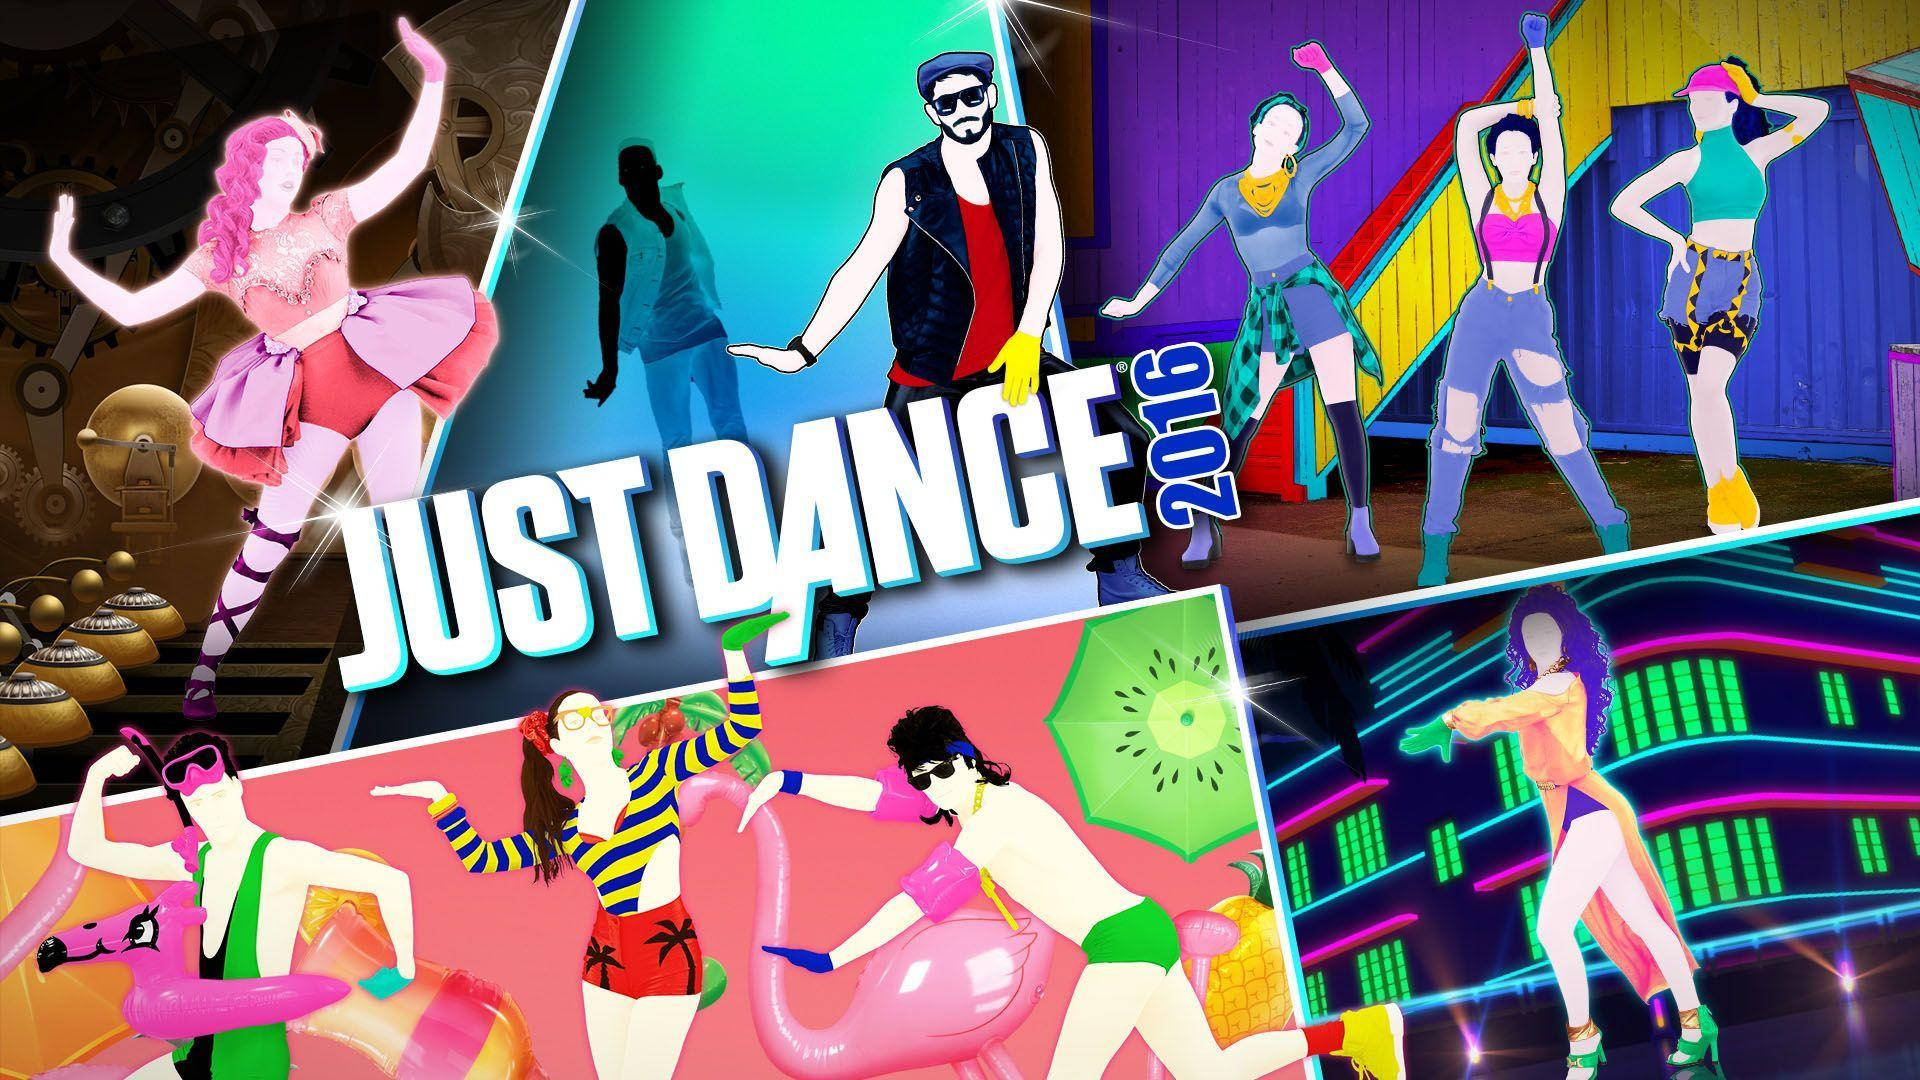 Just Dance 2016 Poster Background